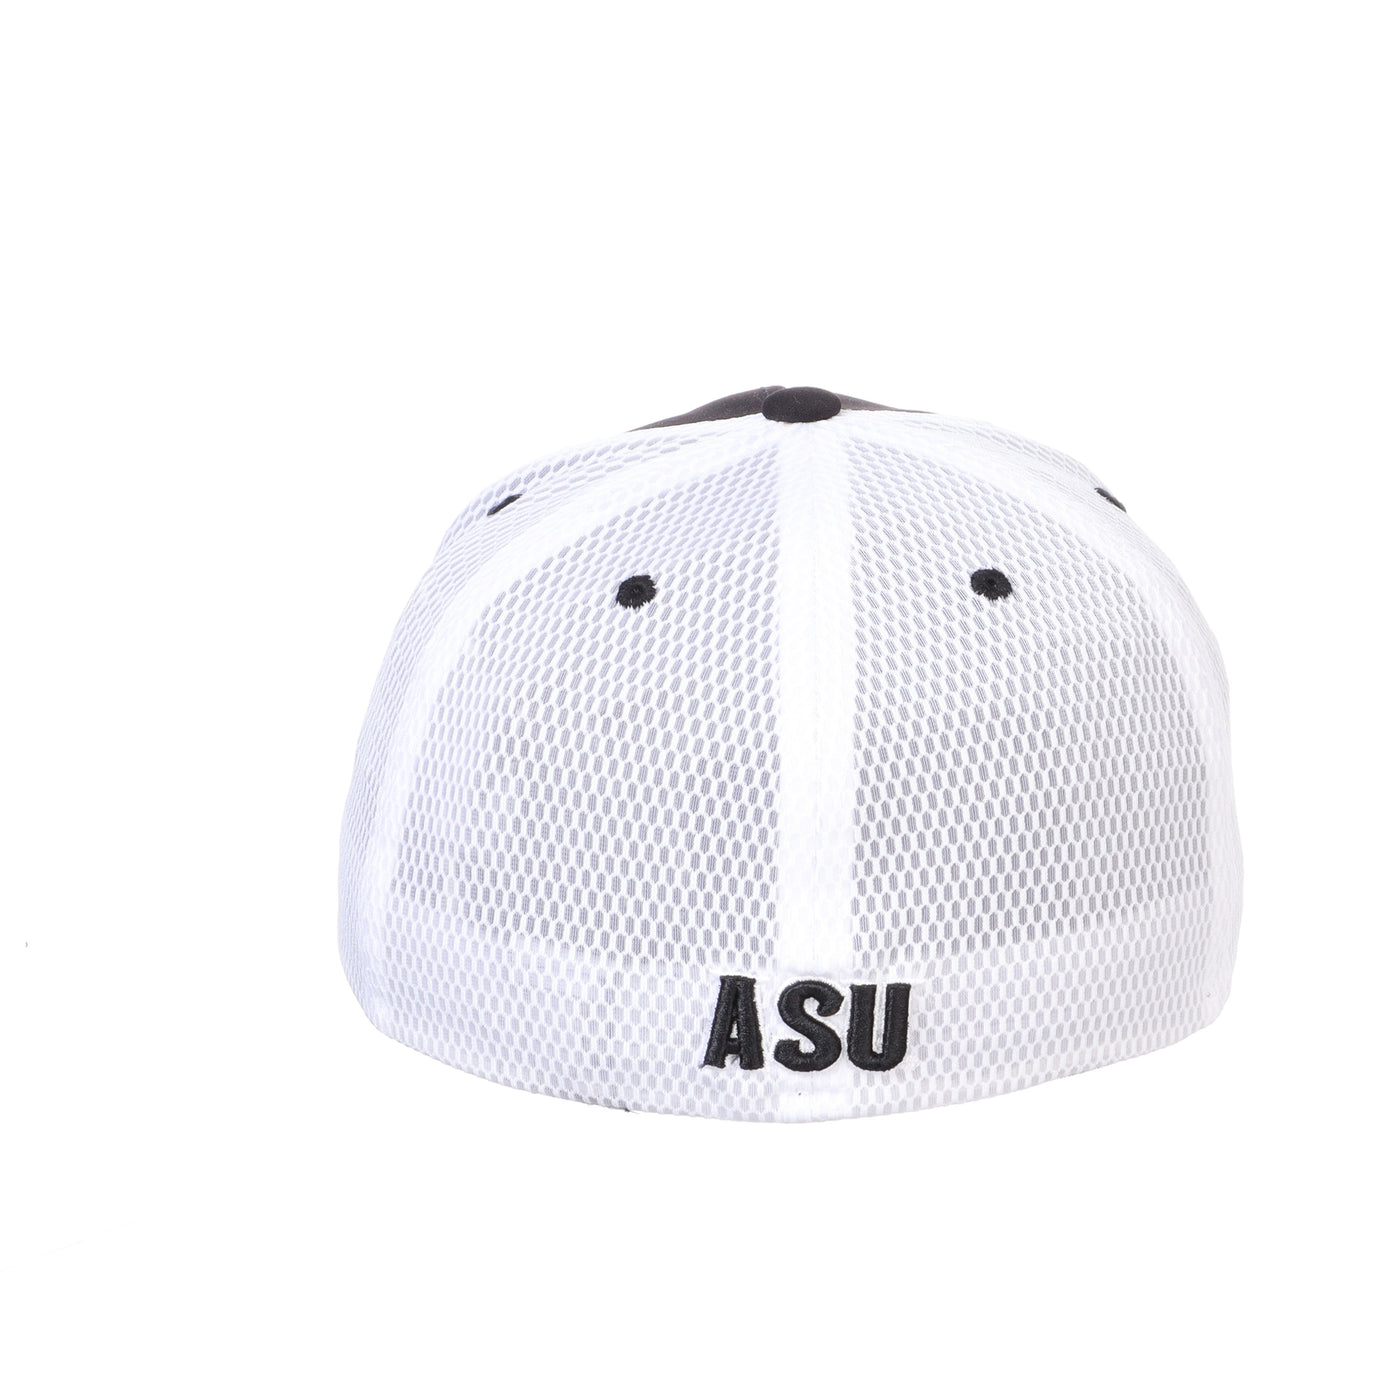 ASU stretch fit hat with white mesh back and 'ASU' embroidered lettering